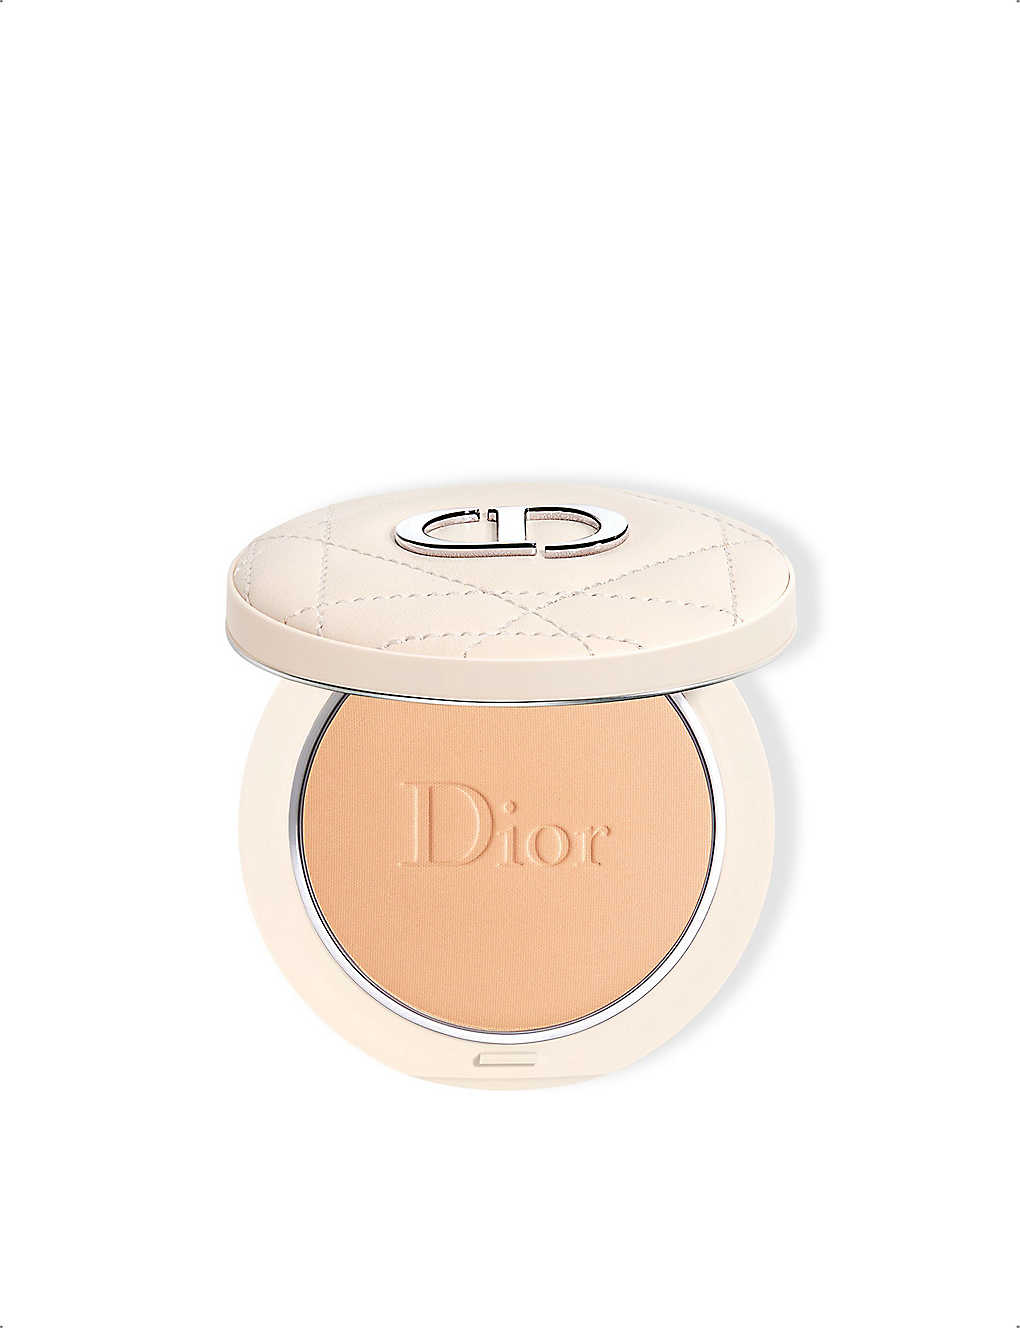 Dior Forever Natural Bronze Powder 9g In 001